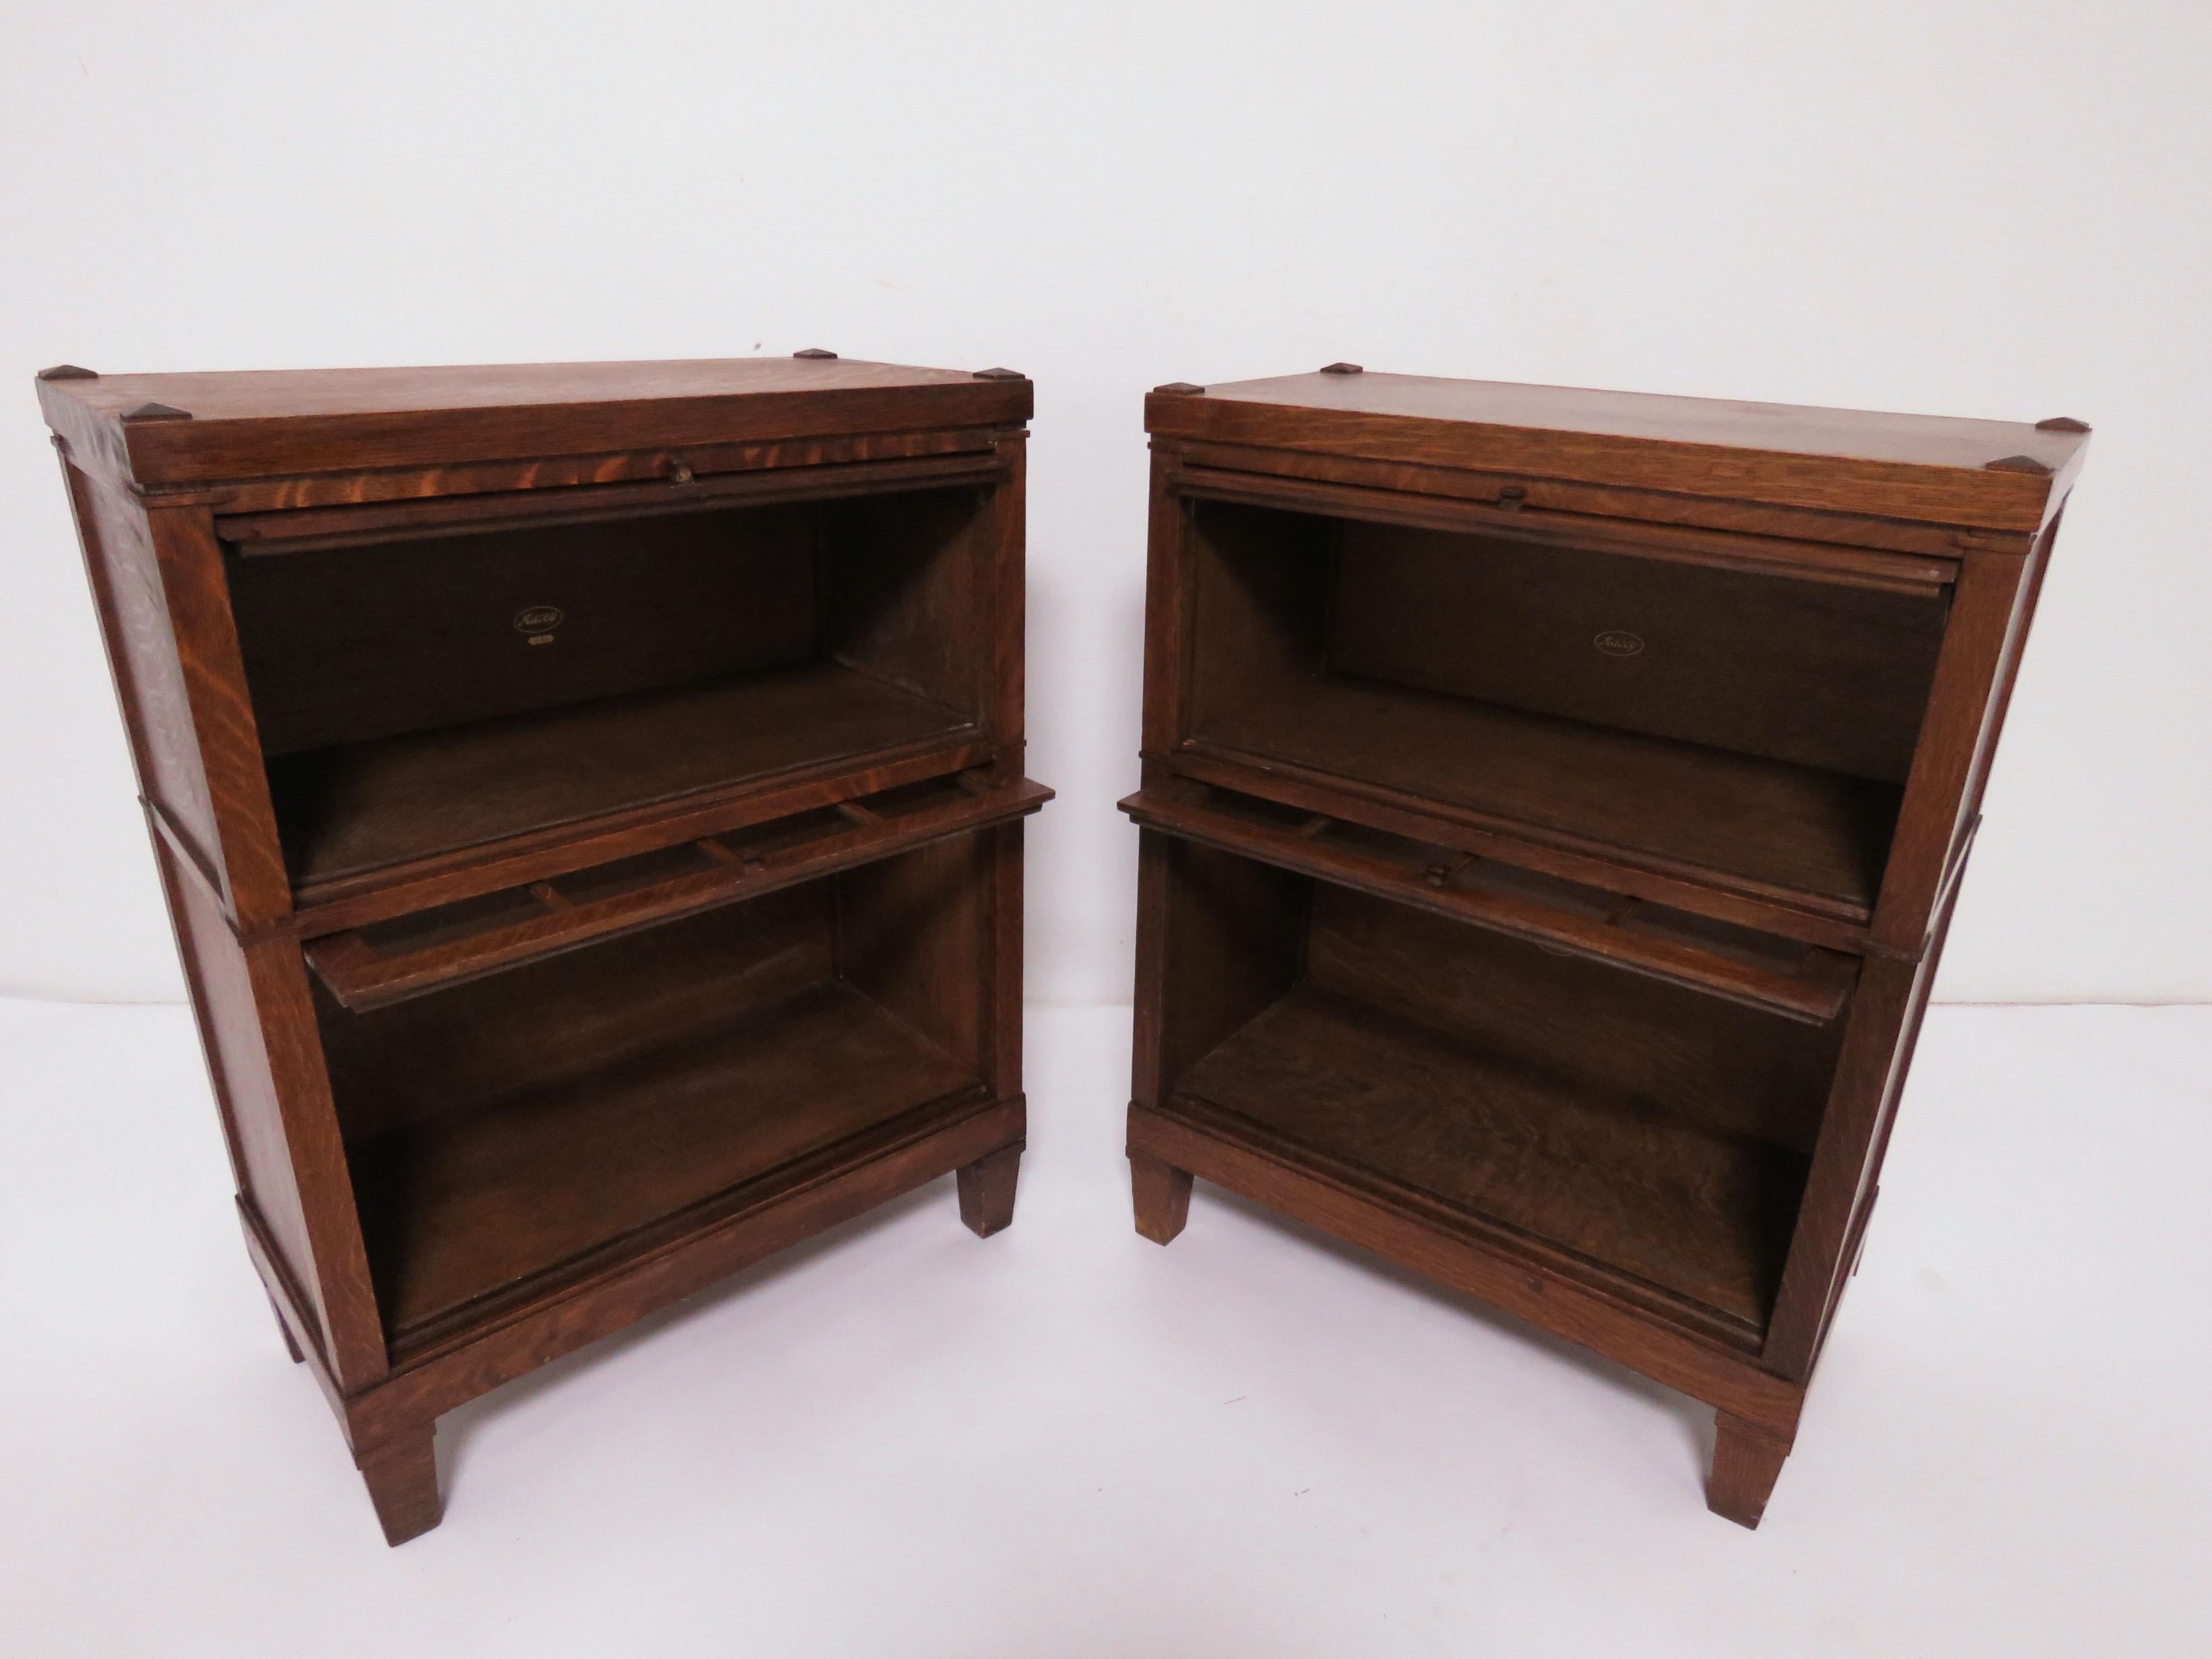 Pair of Mission Oak Arts & Crafts Barrister Bookcase Cabinets by Macey Co. 1